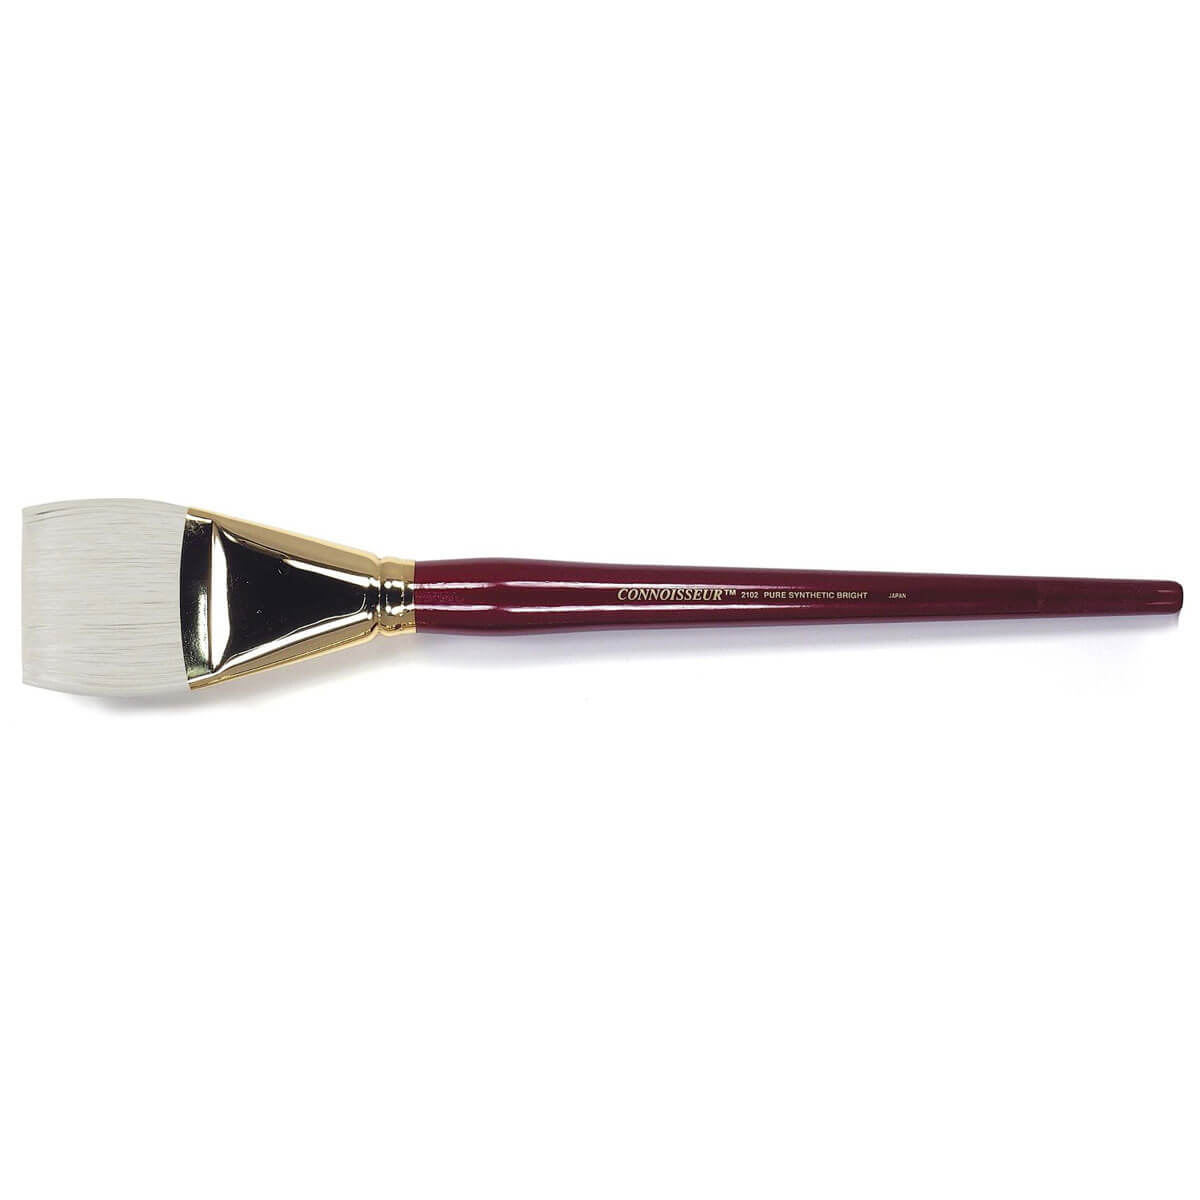 Connoisseur Pure Synthetic Brush Bright No24